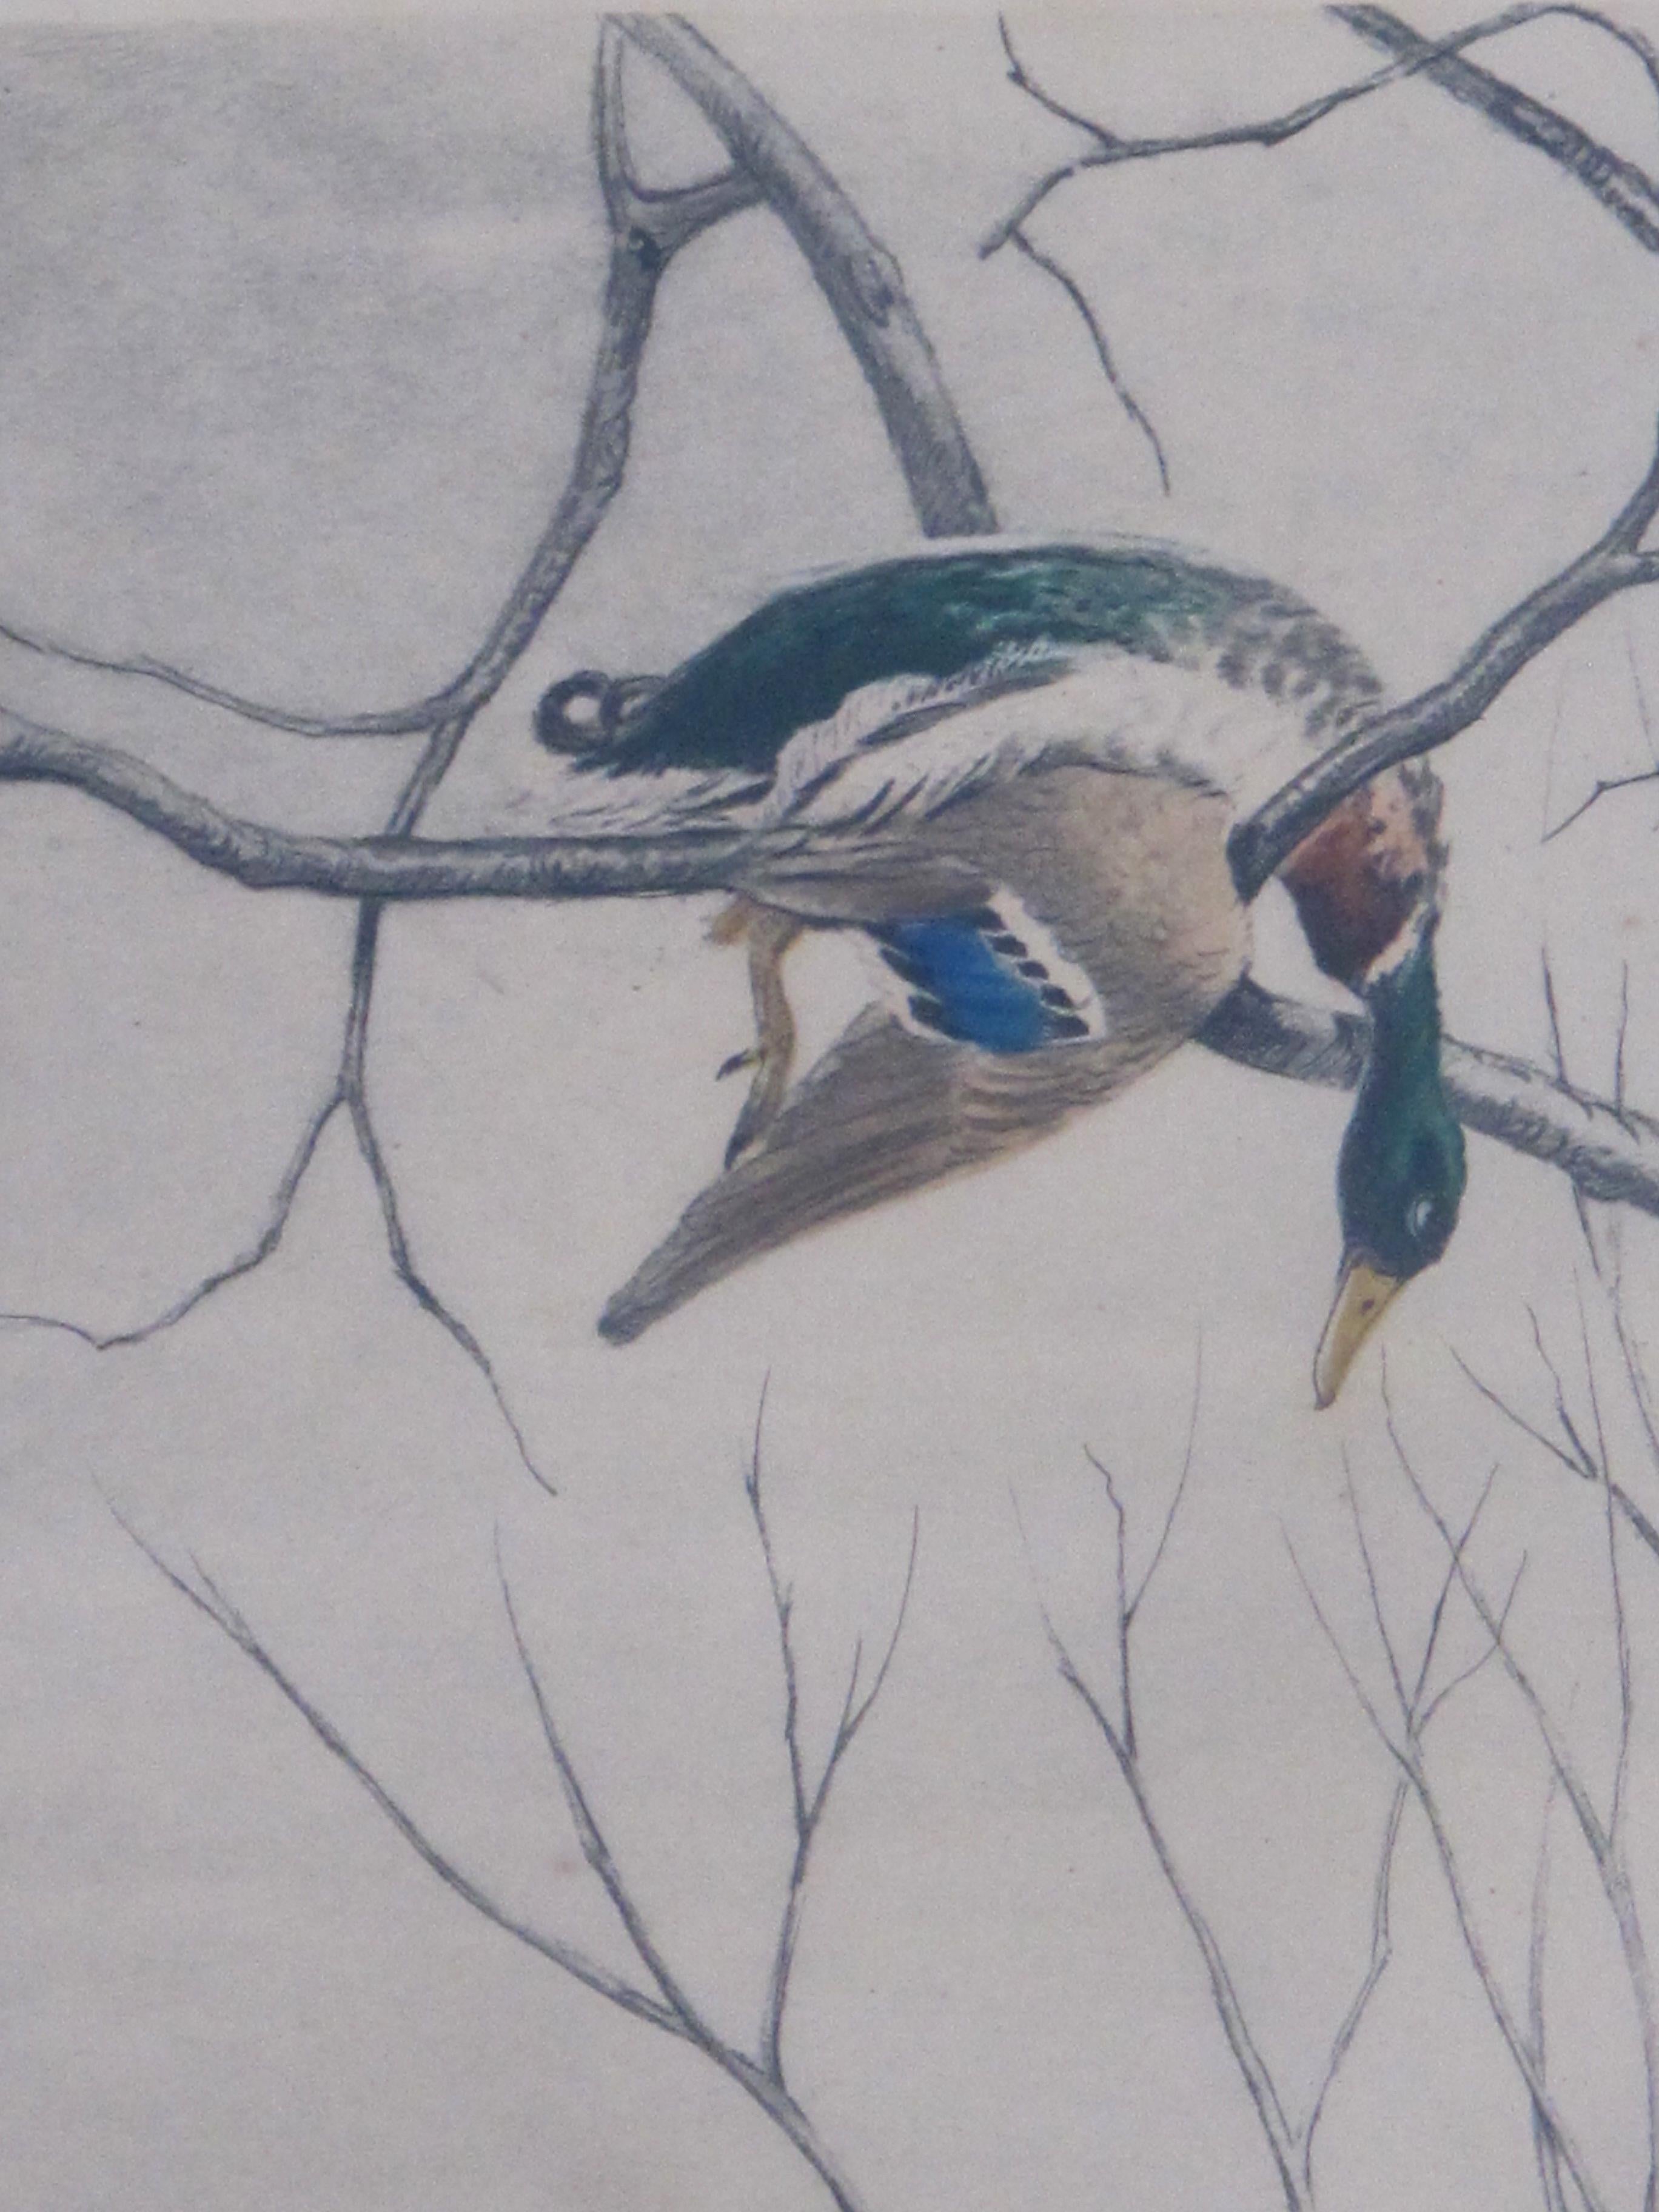 Mid-20th Century Vintage Handcolored Engraving Signed 'Setter et Canard Branche'; Leon Danchin